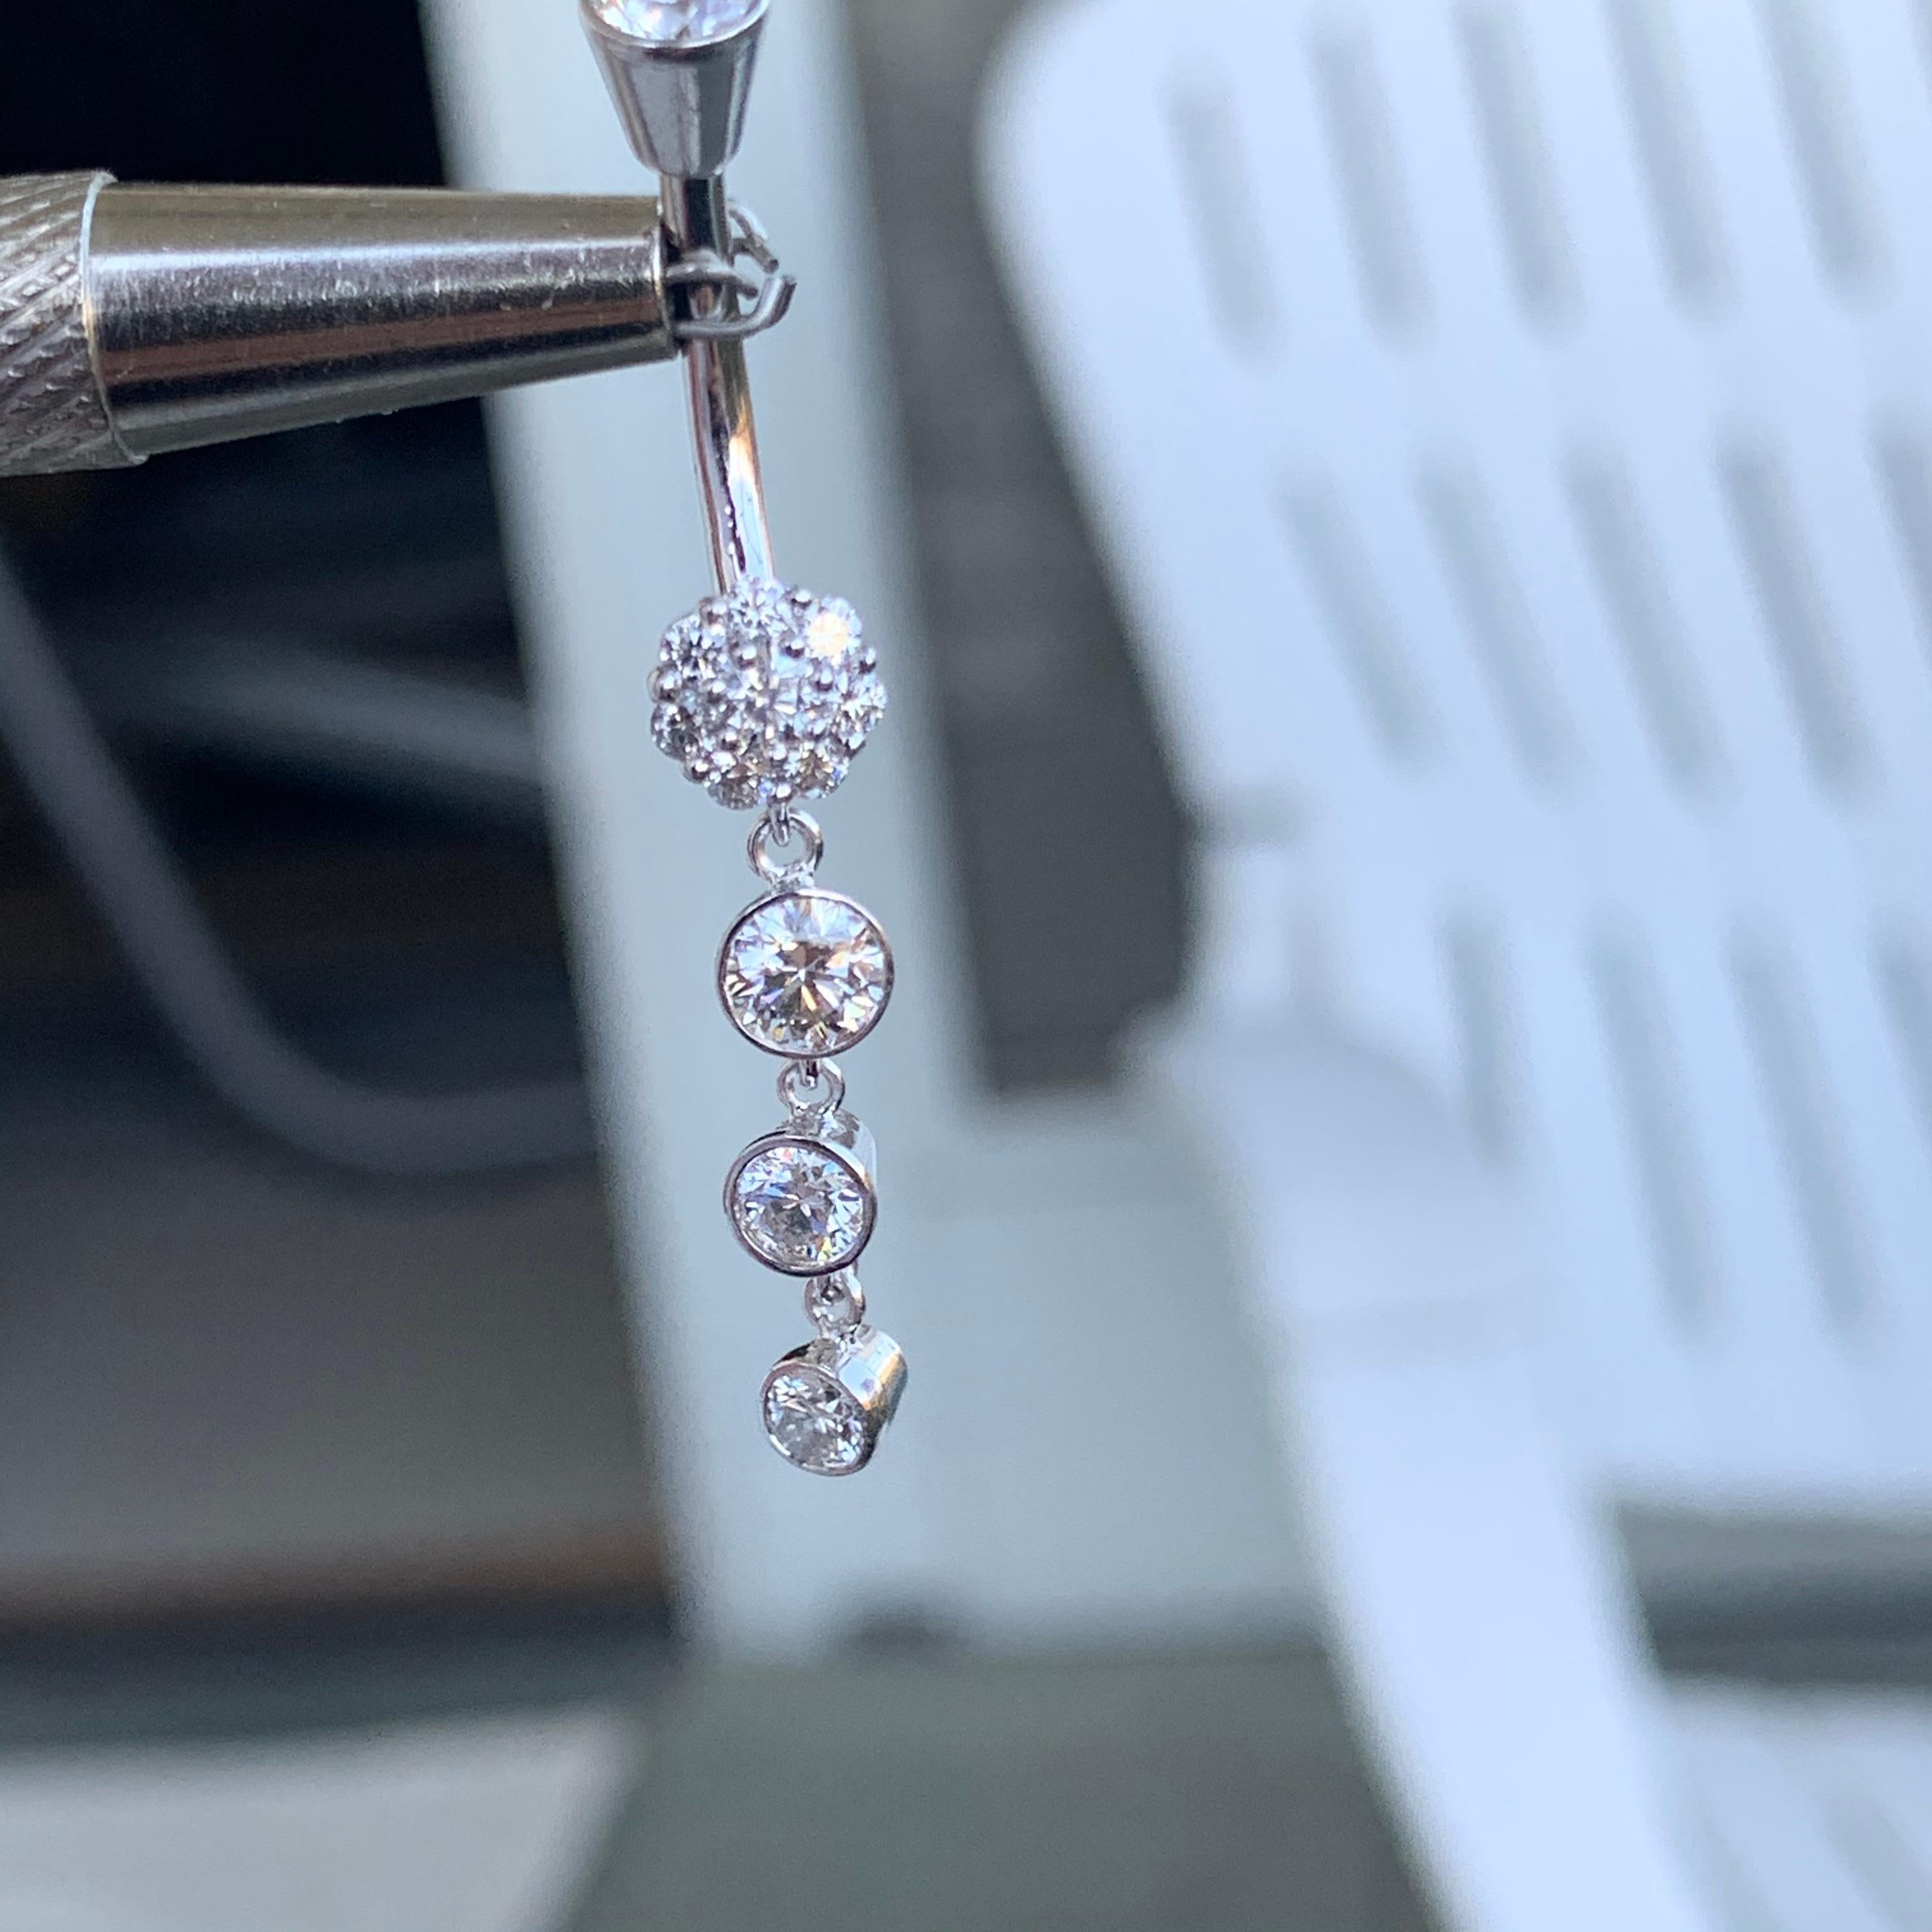 Made to order, please allow 1-3 weeks from date of final design approval by customer.  If you have a rush date you need them by let us know and we will let you know before if we can accommodate you.

Diamond Belly Button Ring but could also be made